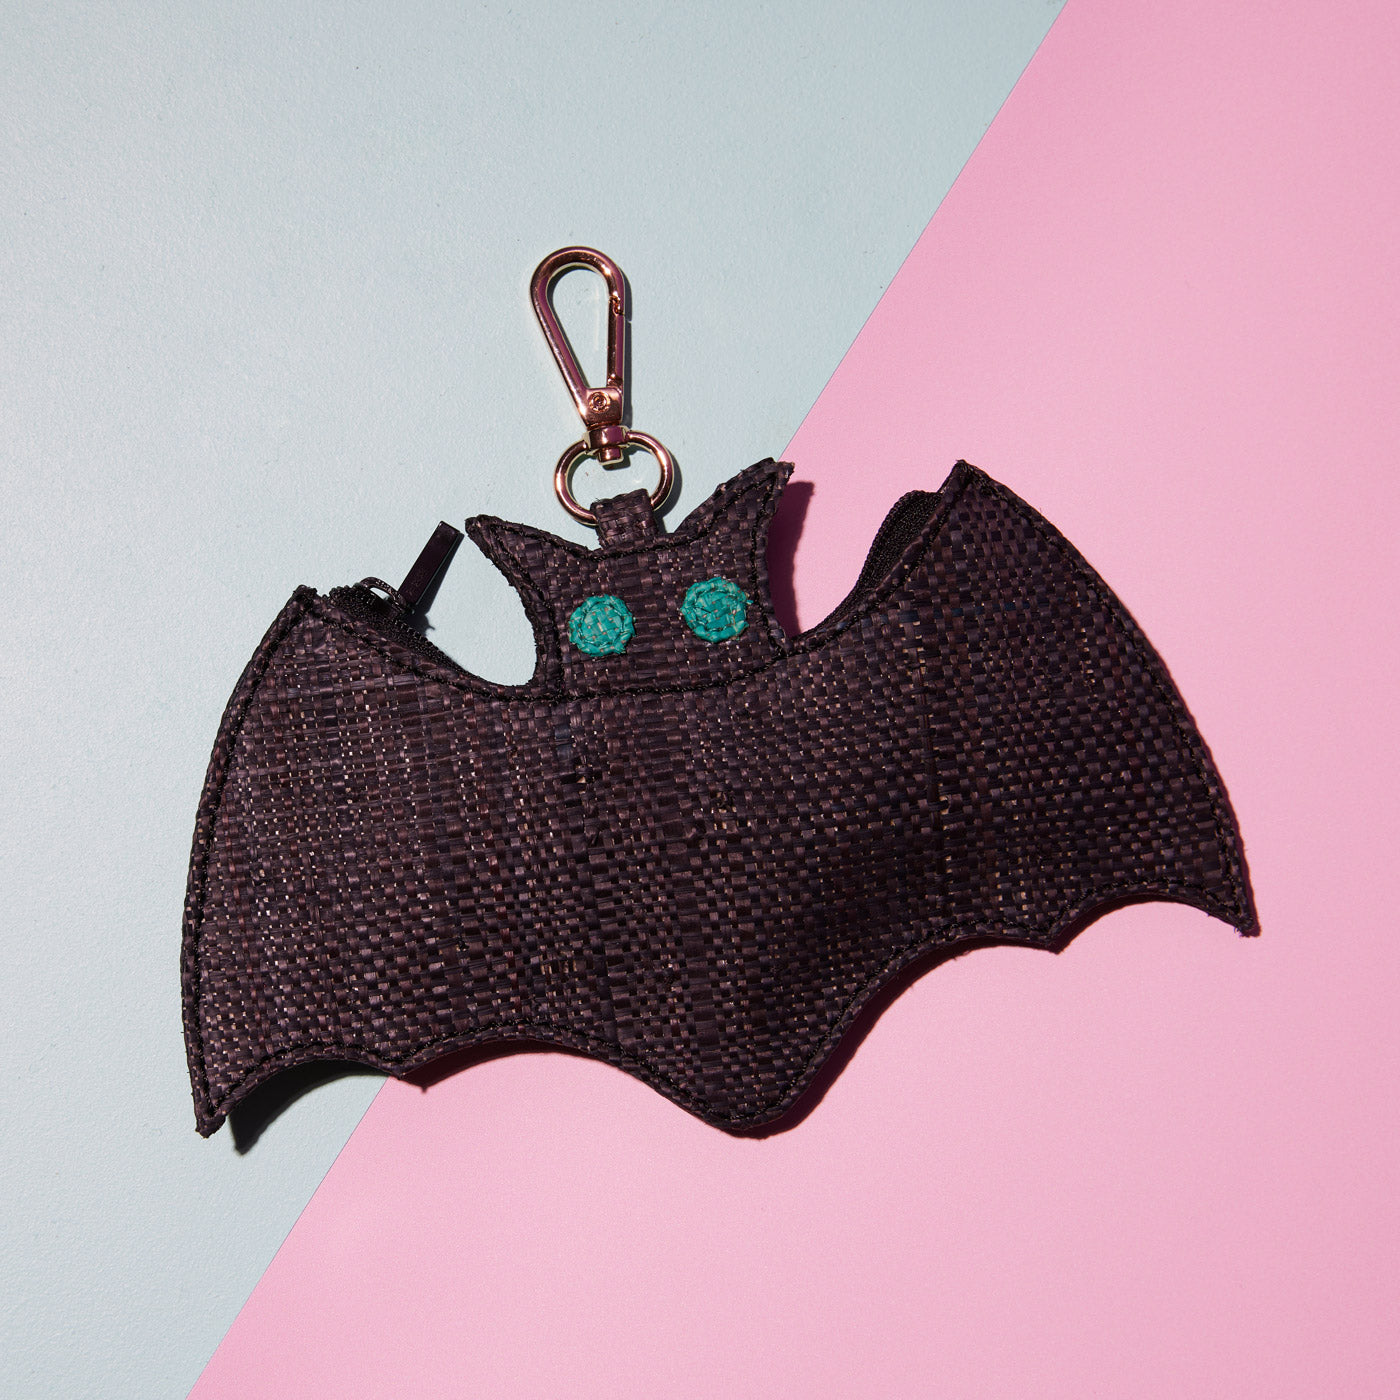 Wicker Darling's Batholomew Jnr. the bat coin purse on a colourful background